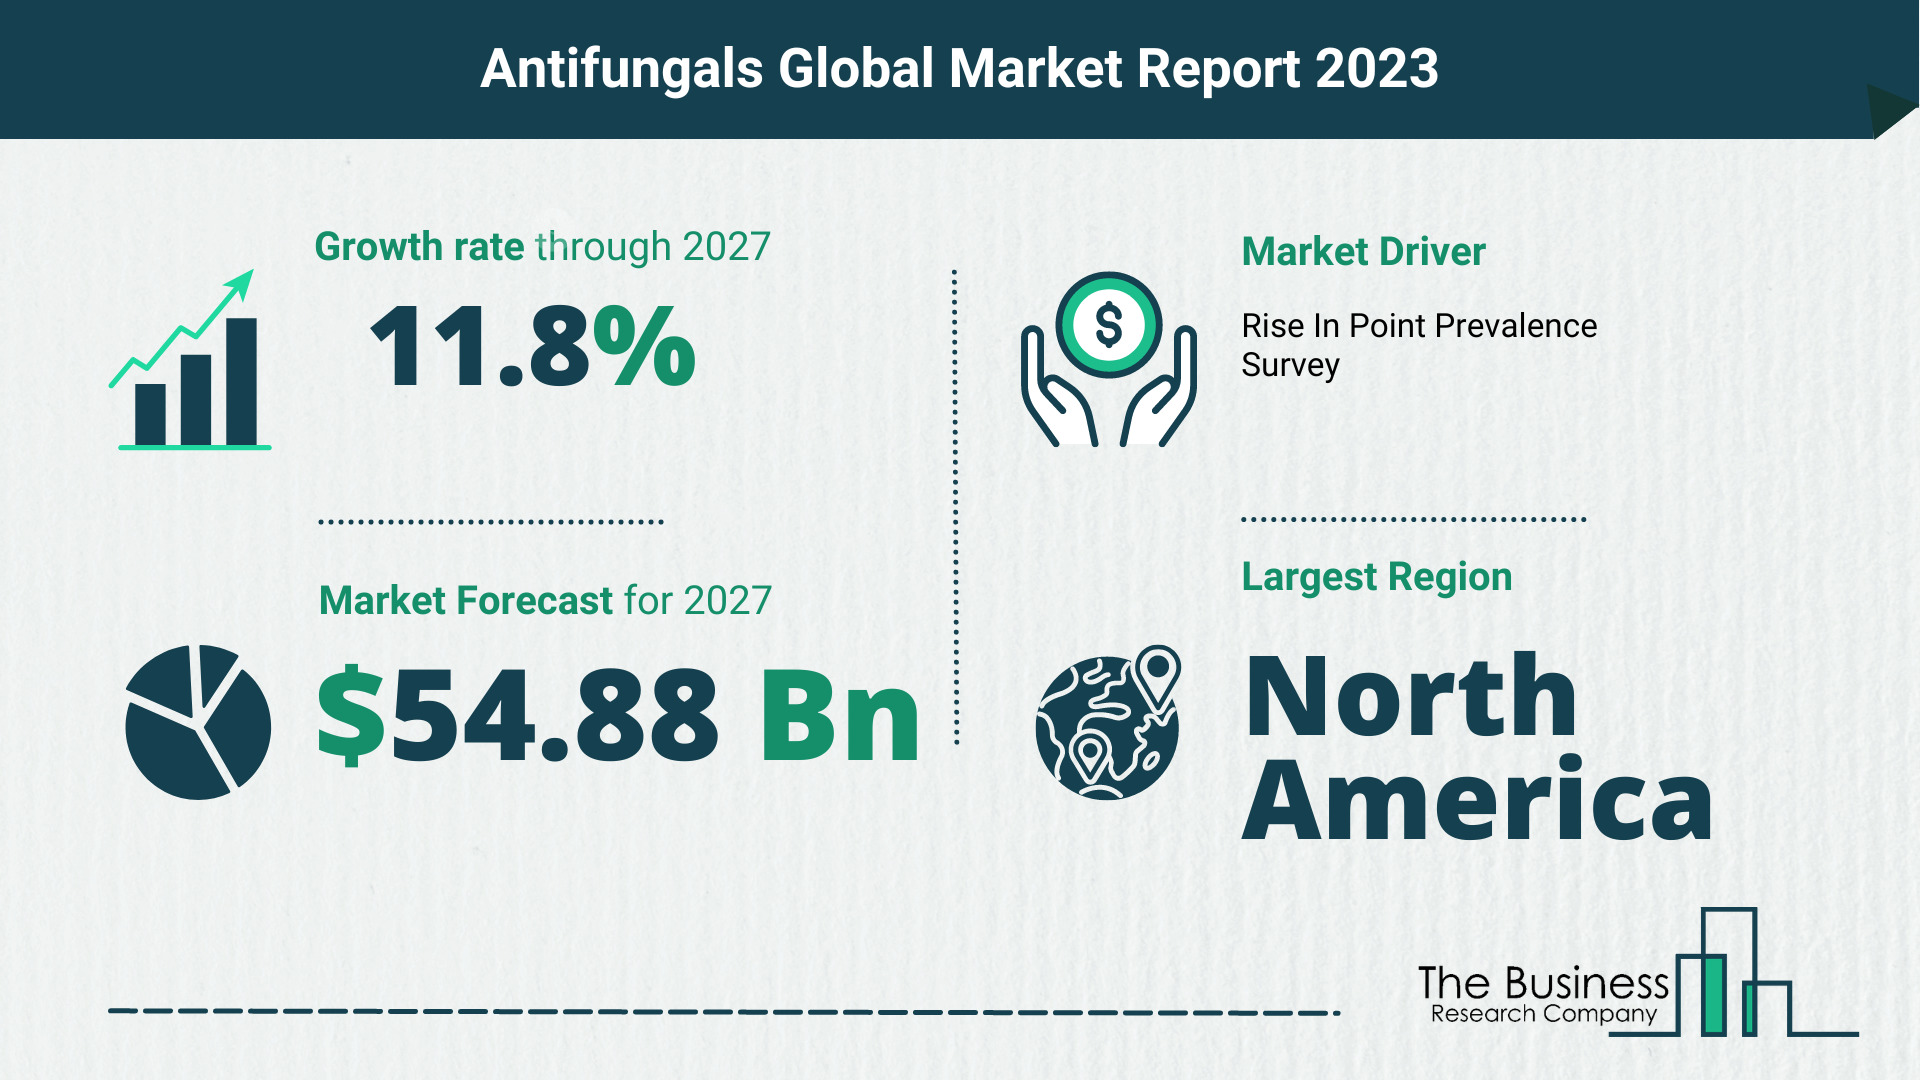 How Will The Antifungals Market Globally Expand In 2023?